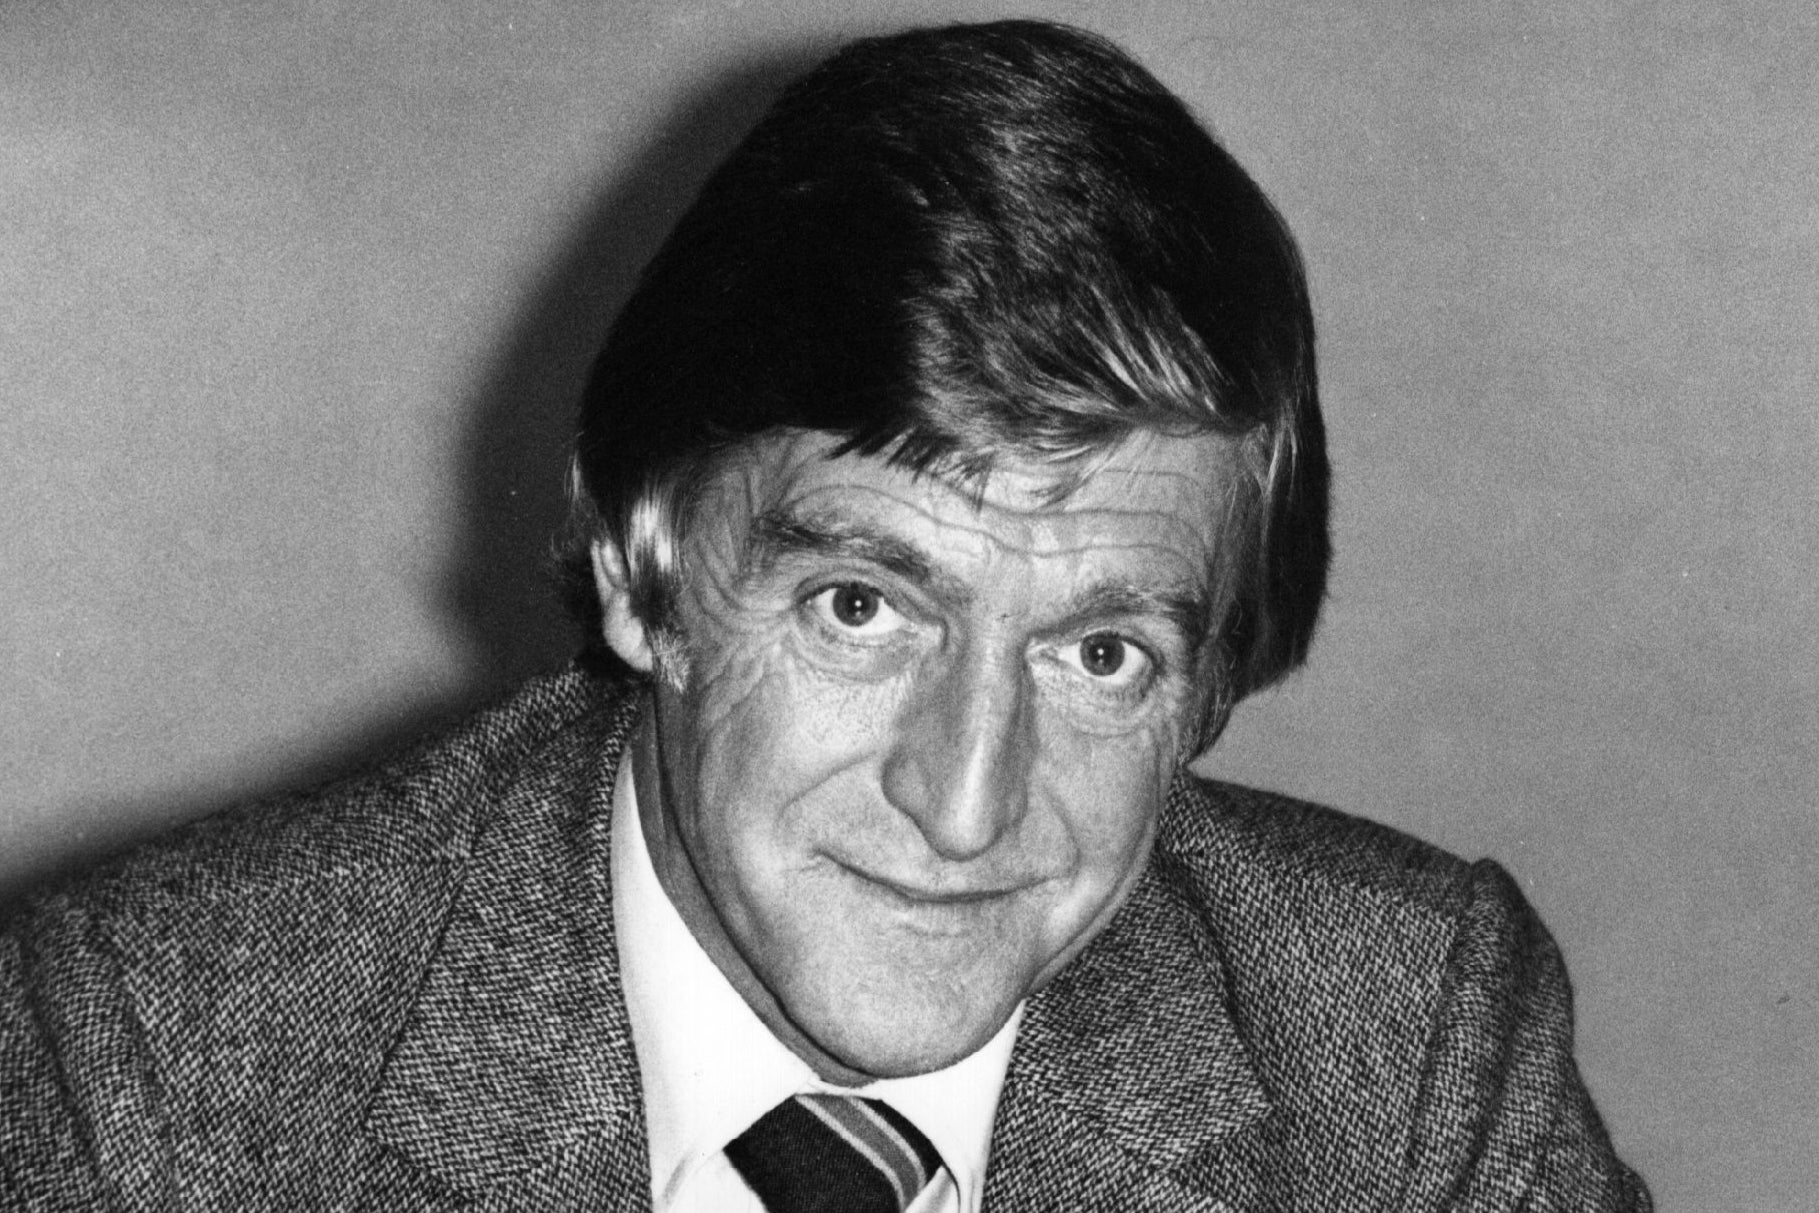 The late chat show host Michael Parkinson in 1980